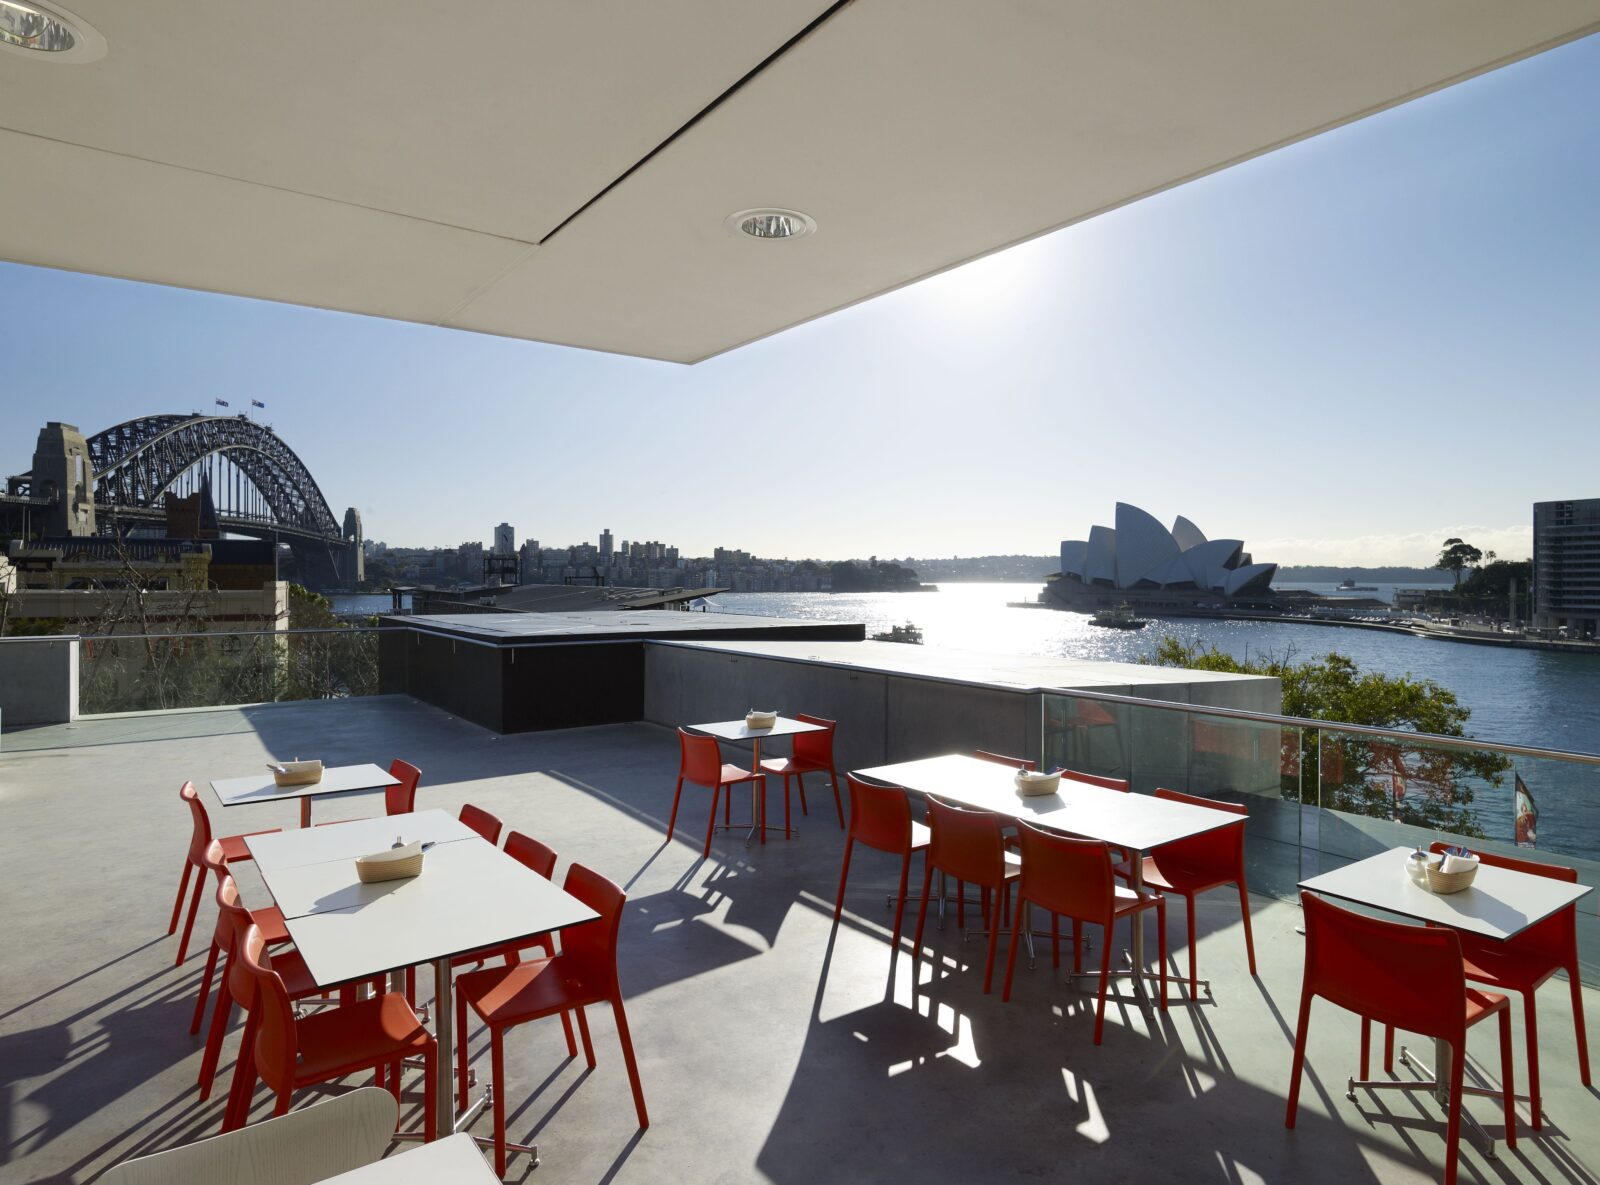 Al fresco dining with iconic Sydney Harbour views